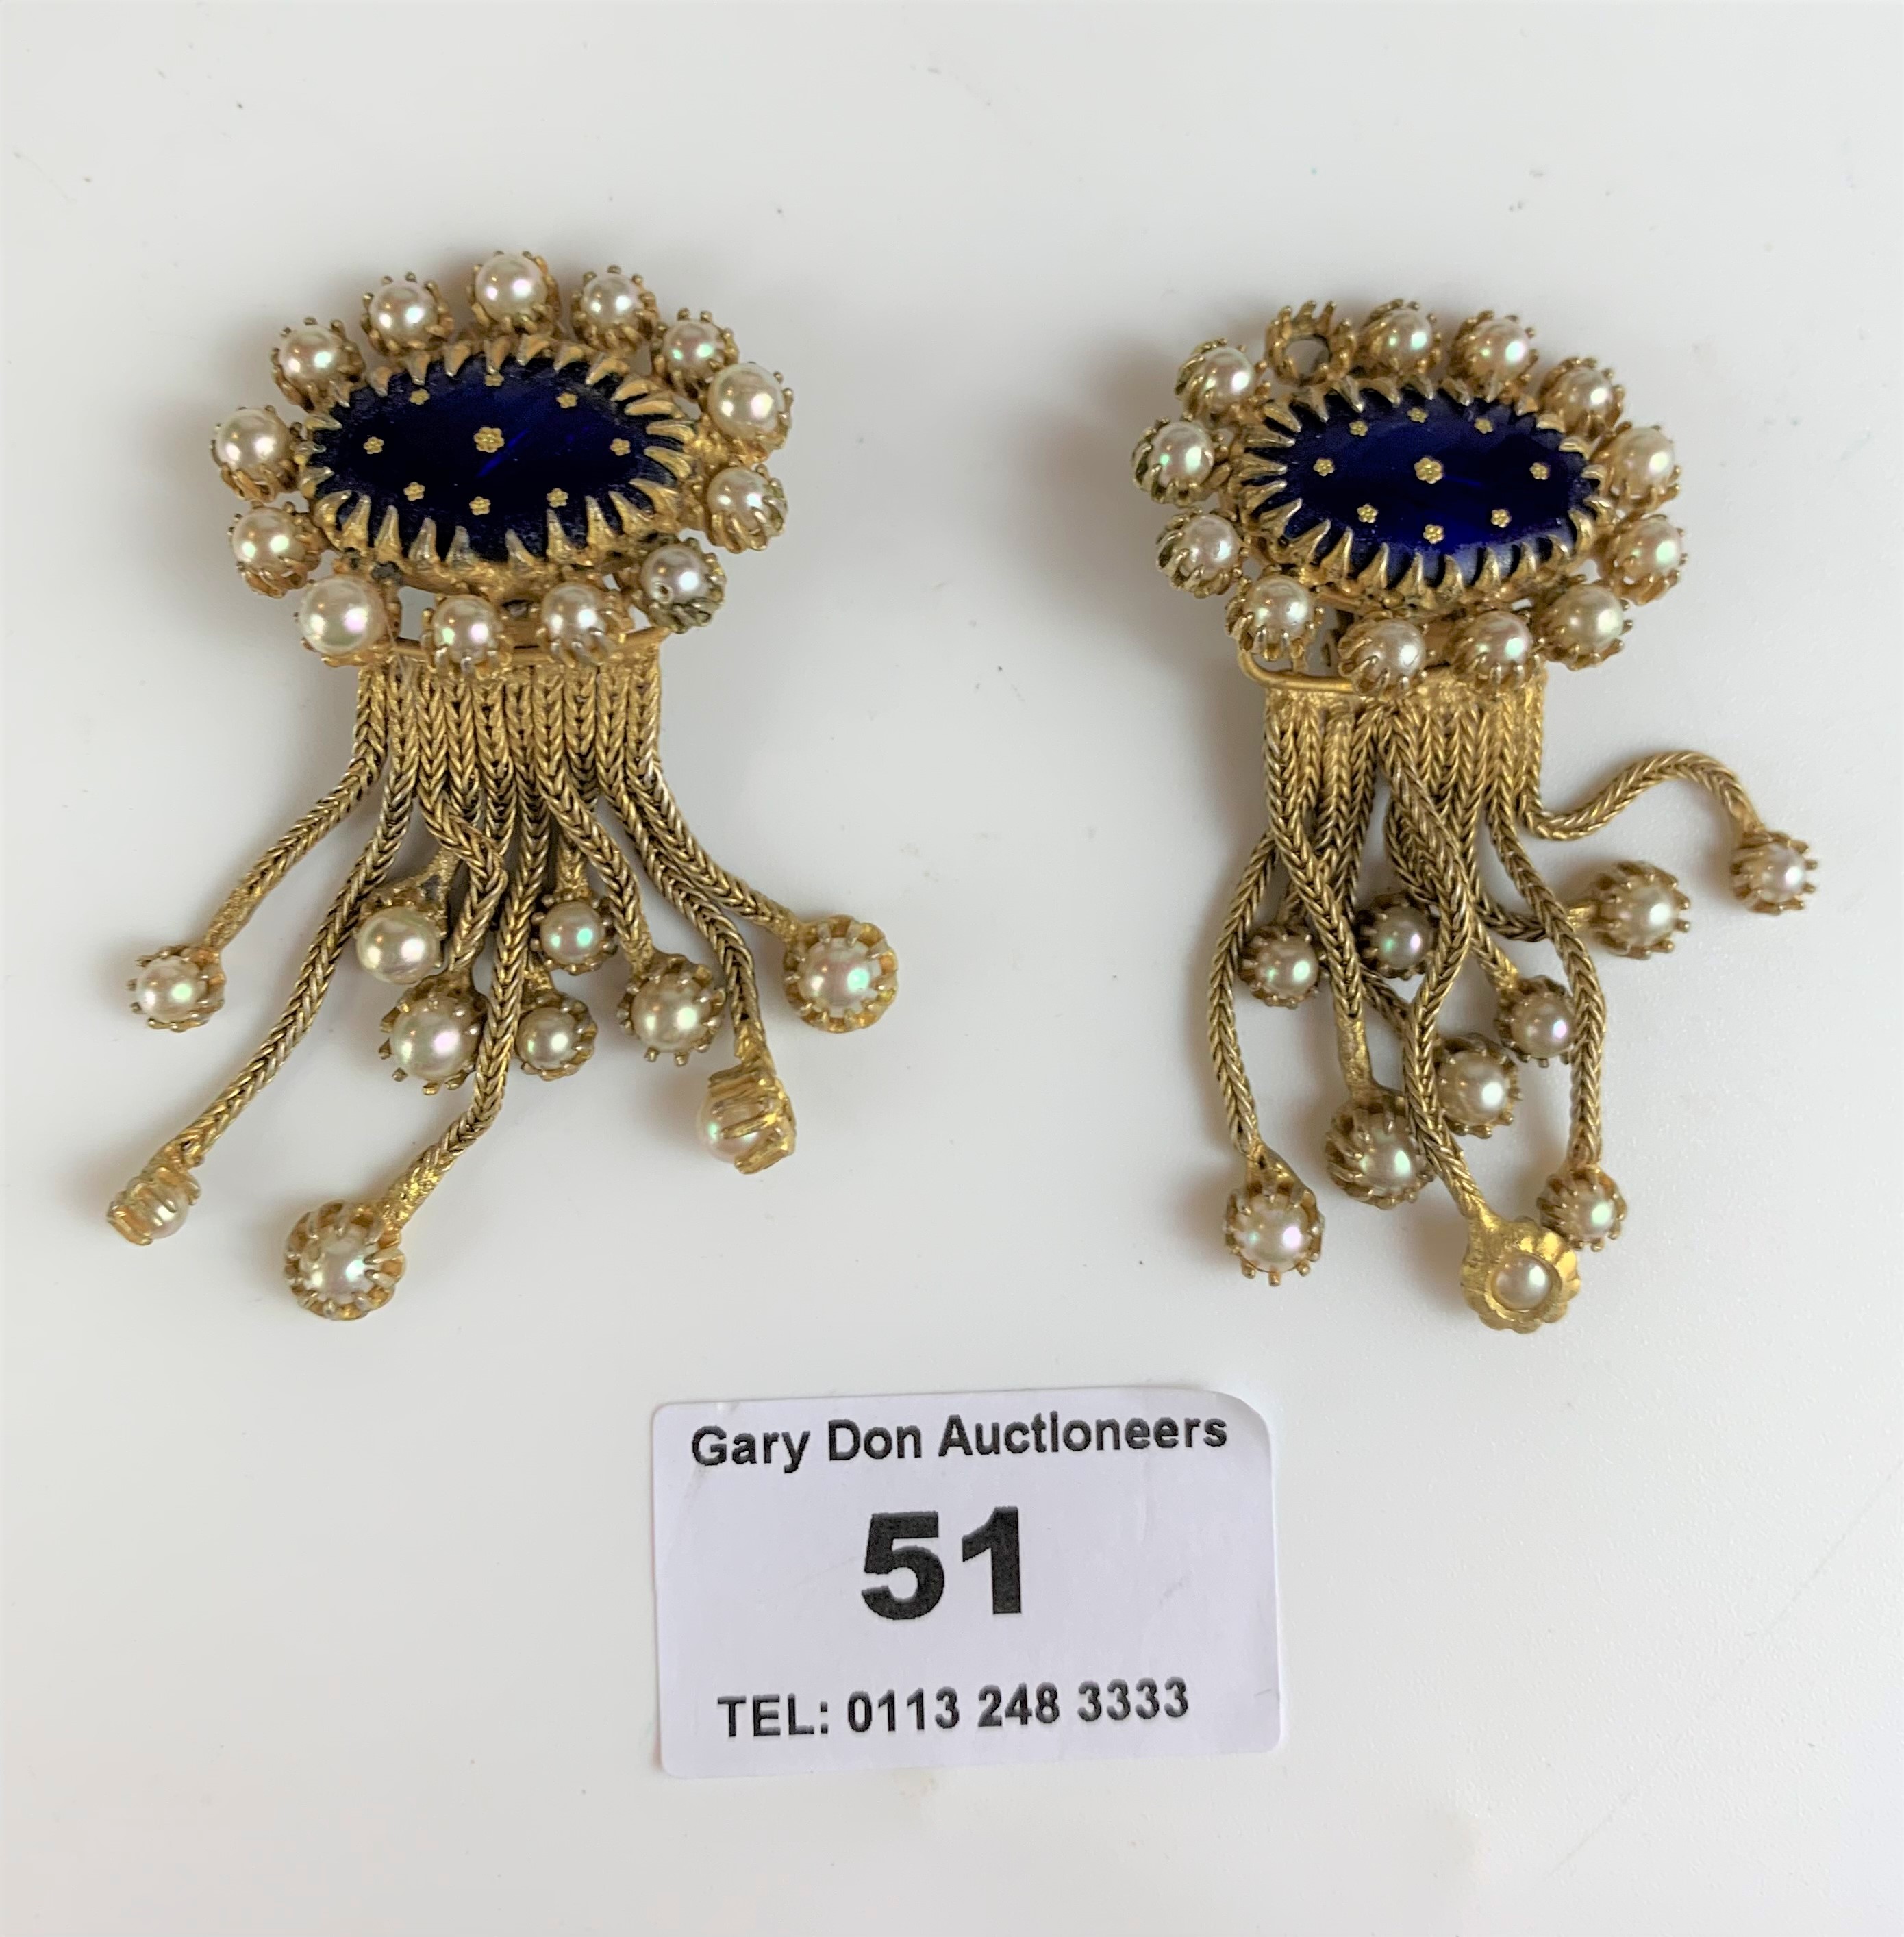 Pair of Christian Dior earrings by Michel Maer (1 pearl missing)